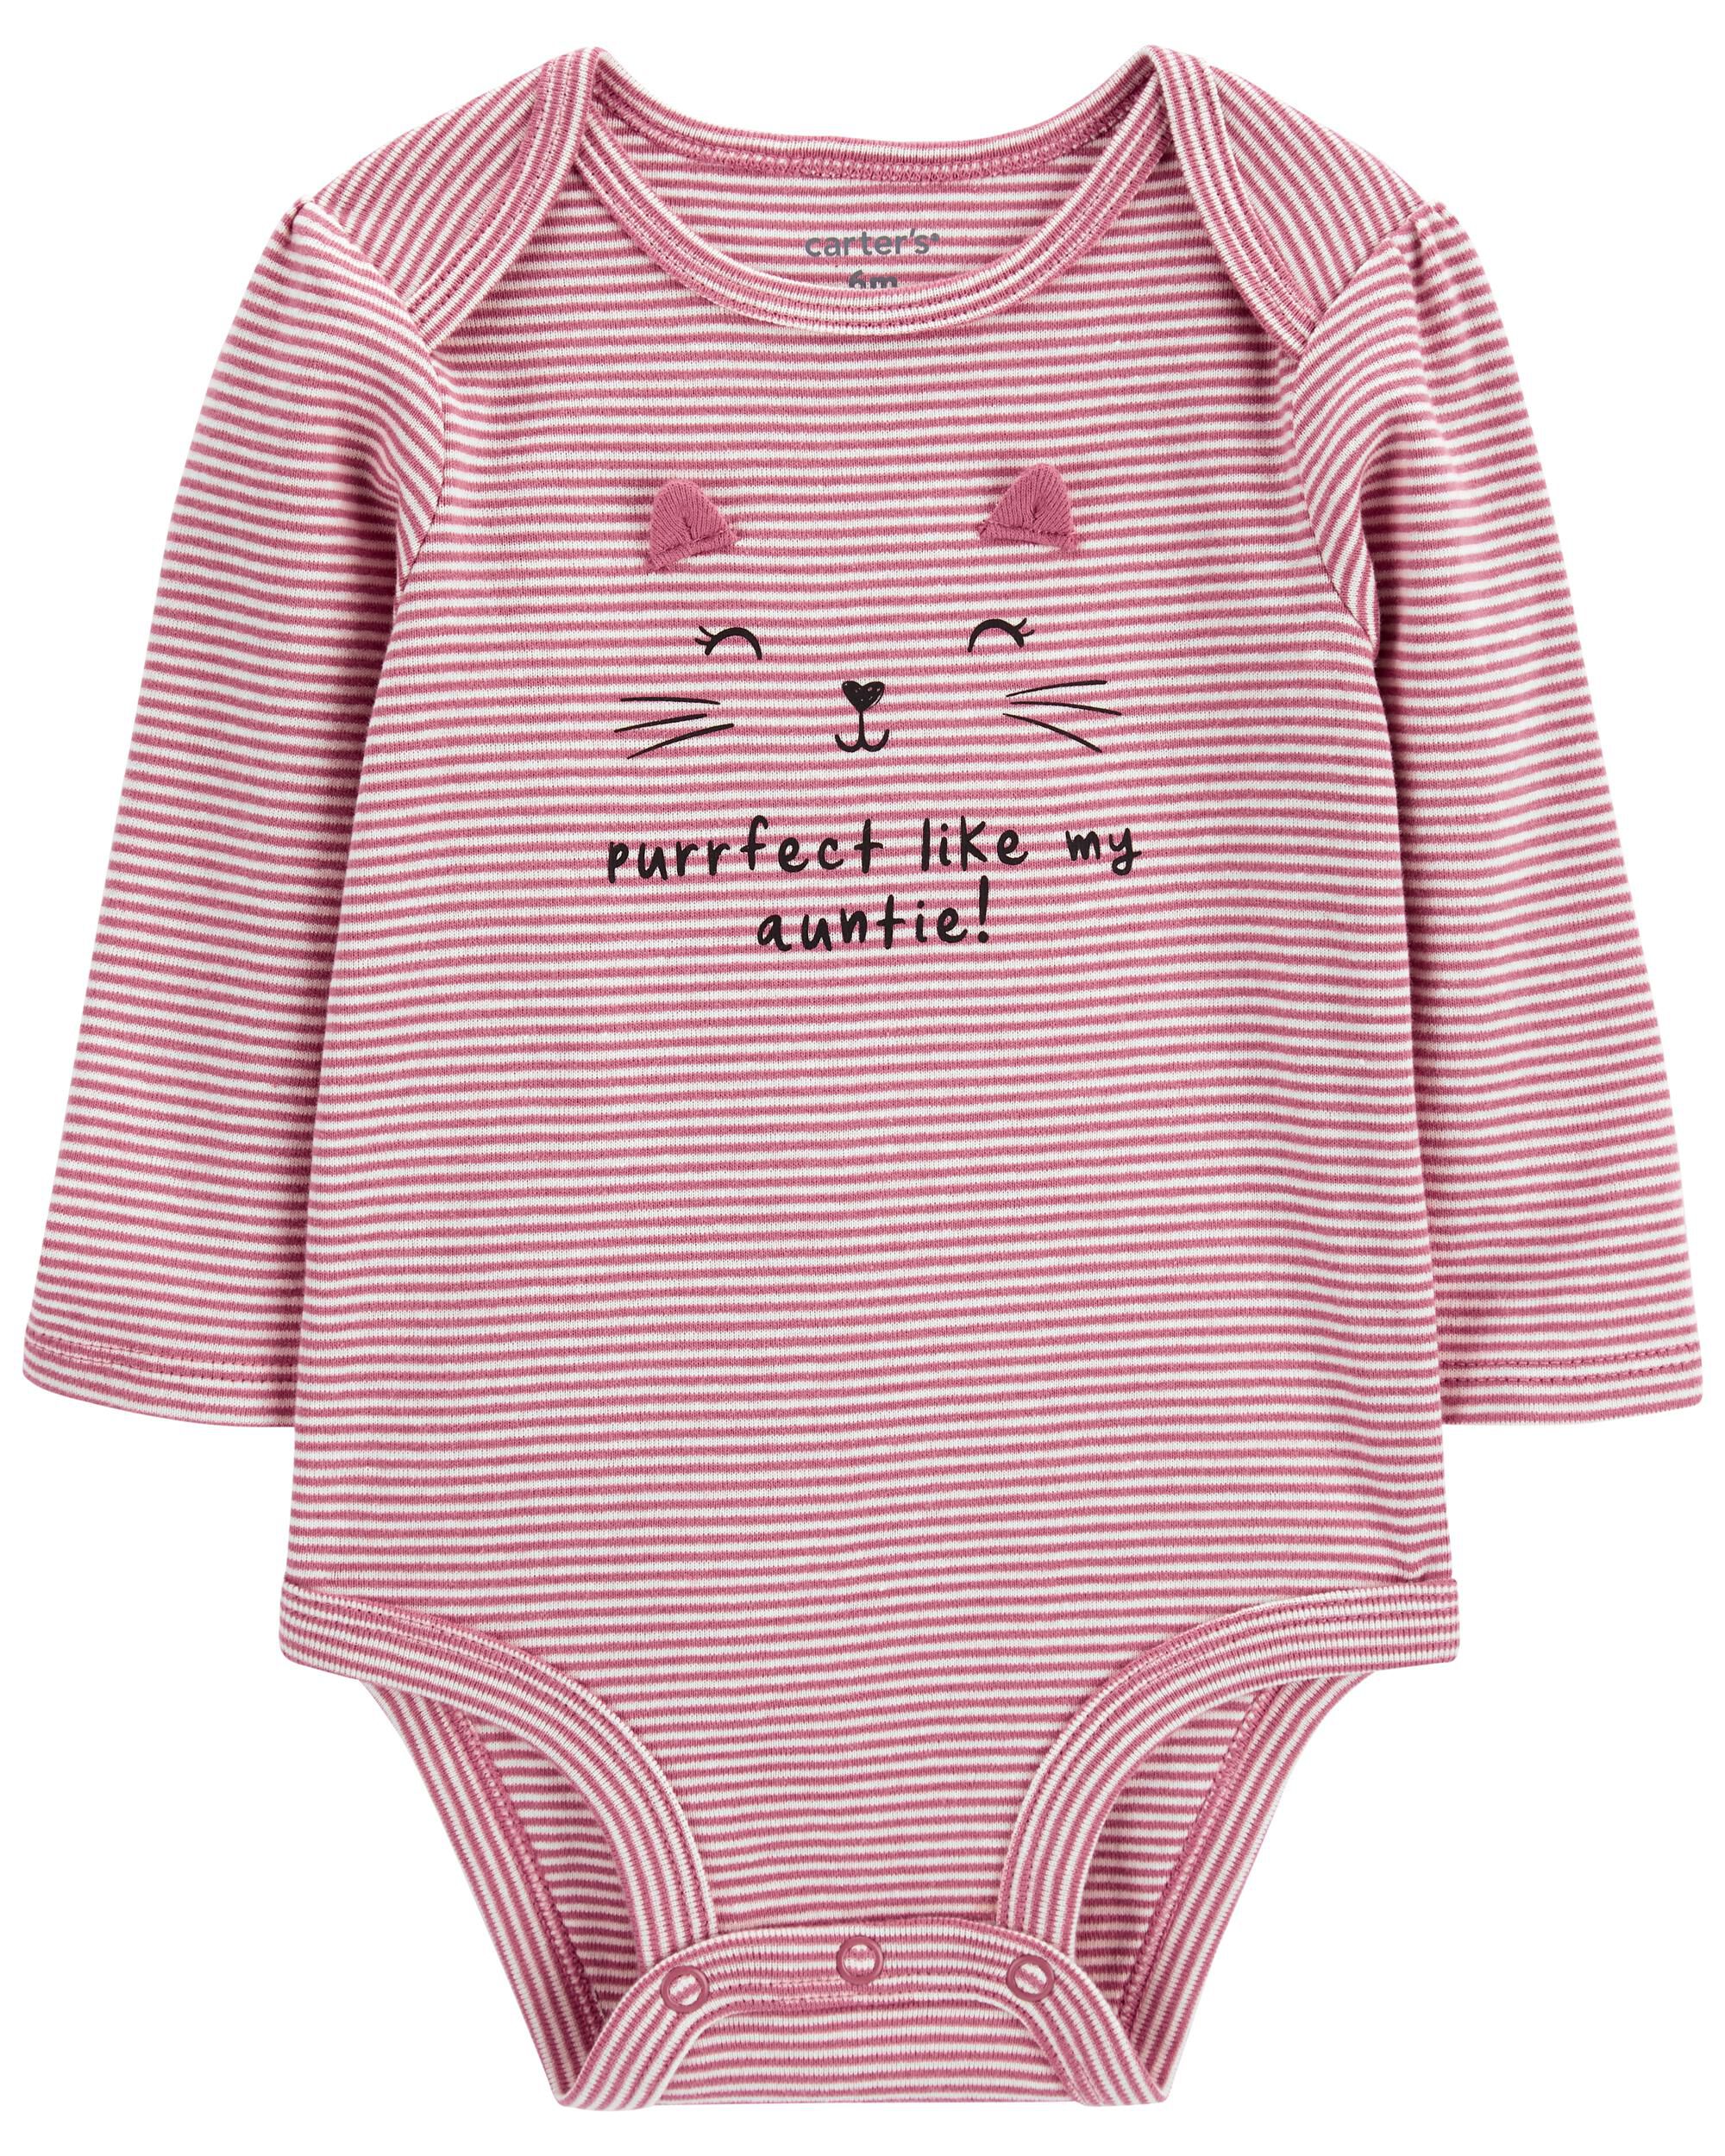 Carters Striped Collectible Bodysuit